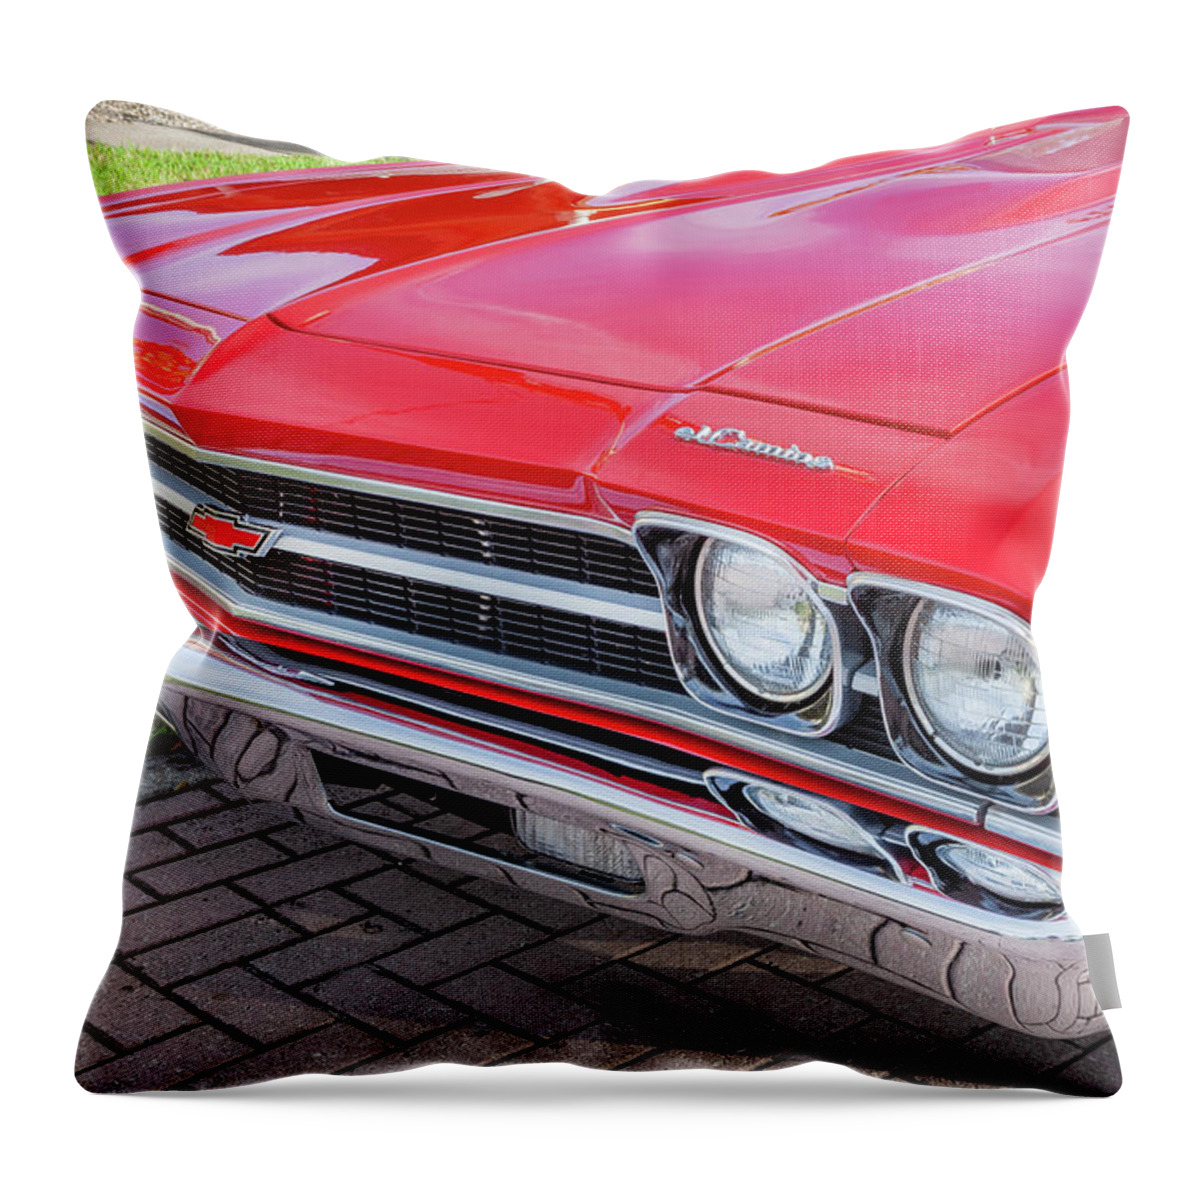 1969 Chevrolet El Camino 350 Throw Pillow featuring the photograph Red 1969 Chevrolet El Camino Custom 350 X116 by Rich Franco